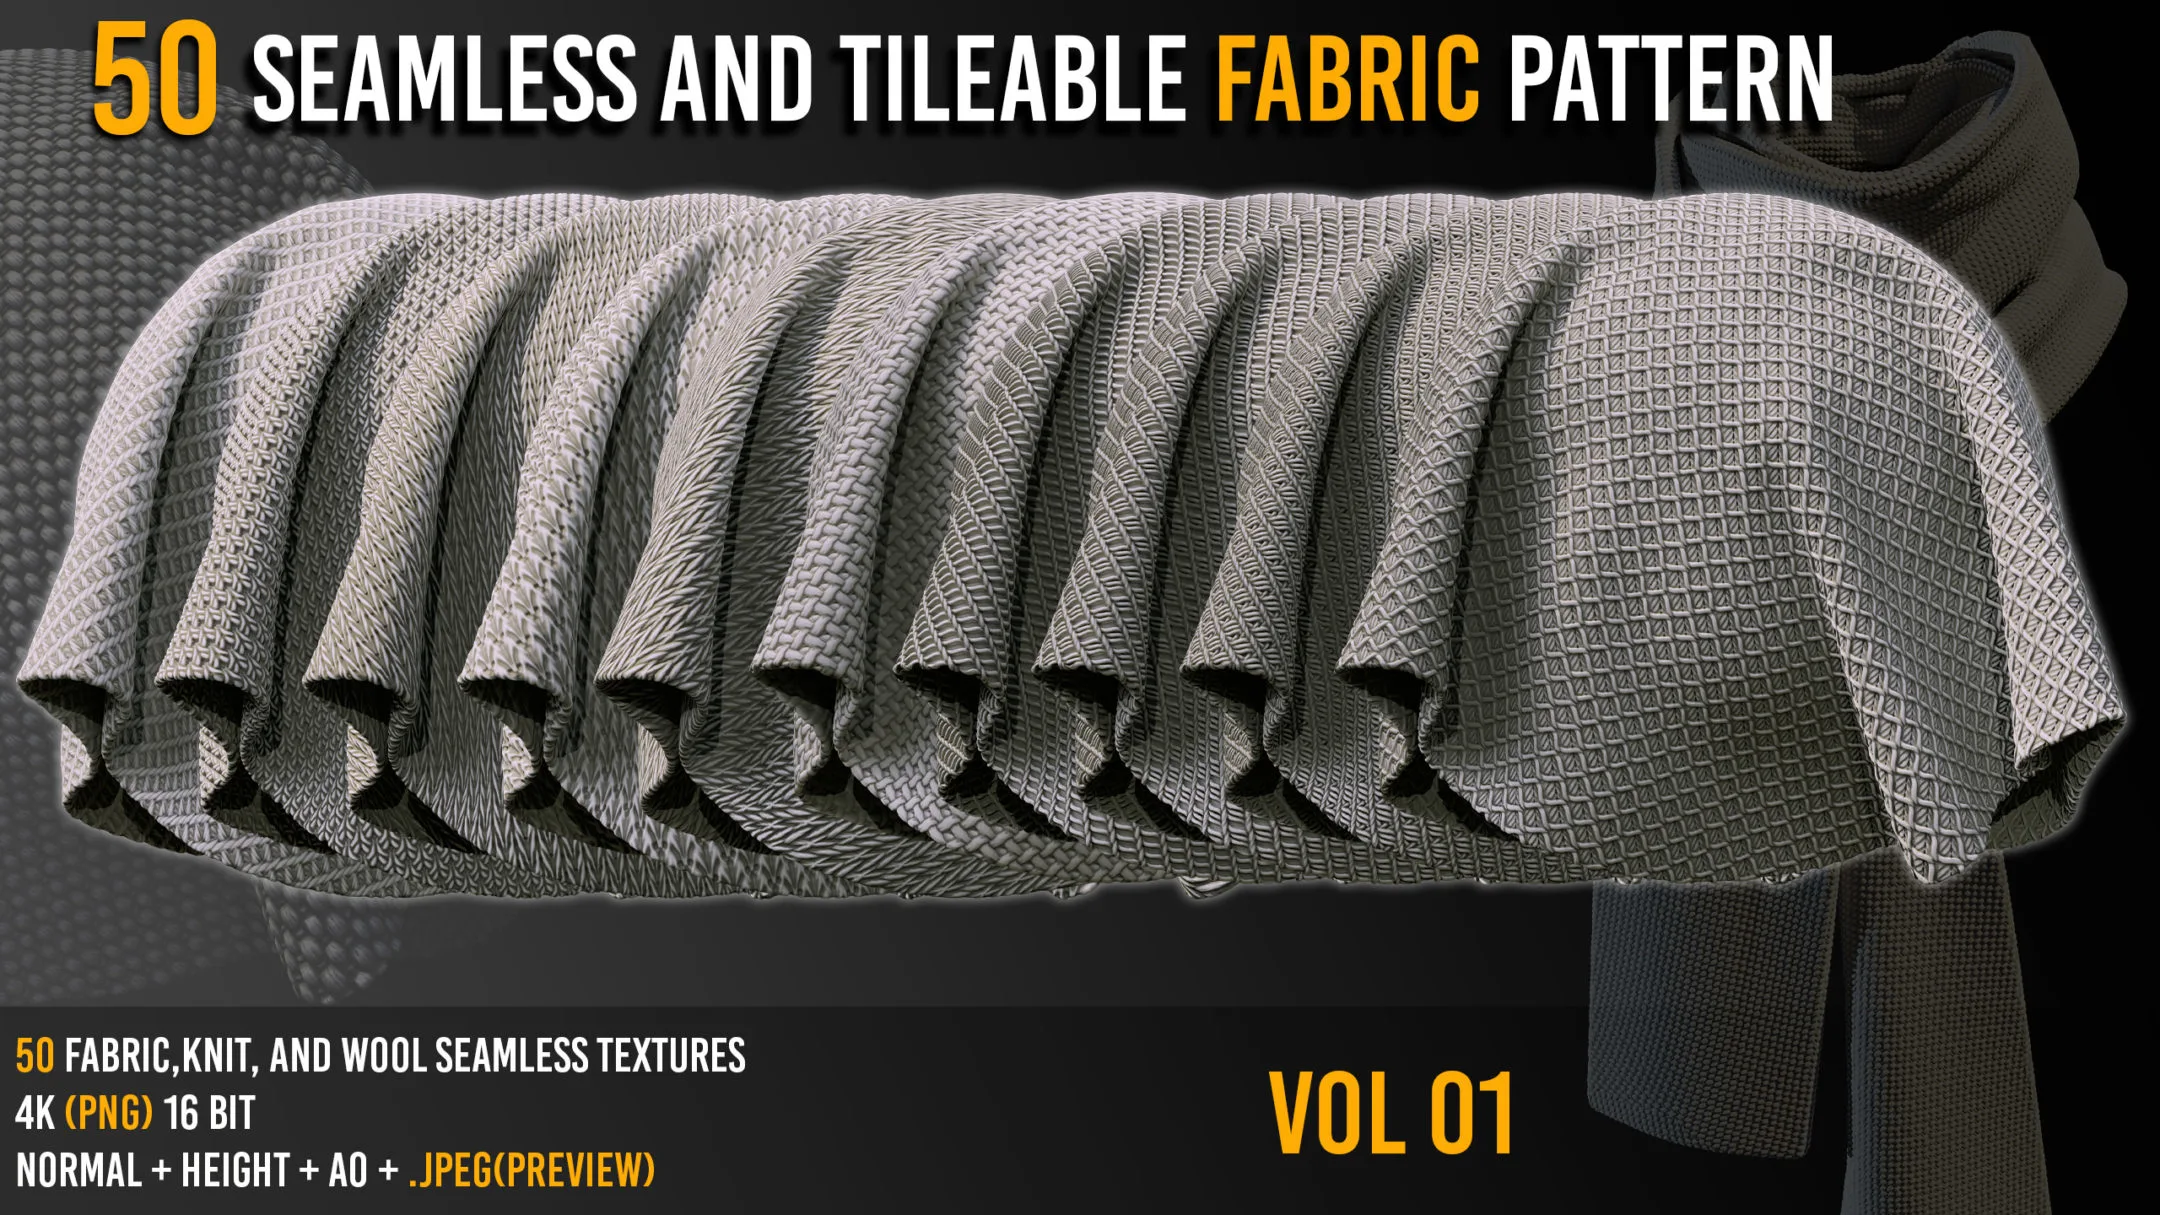 50 Fabric Pattern Seamless And Tileable textures